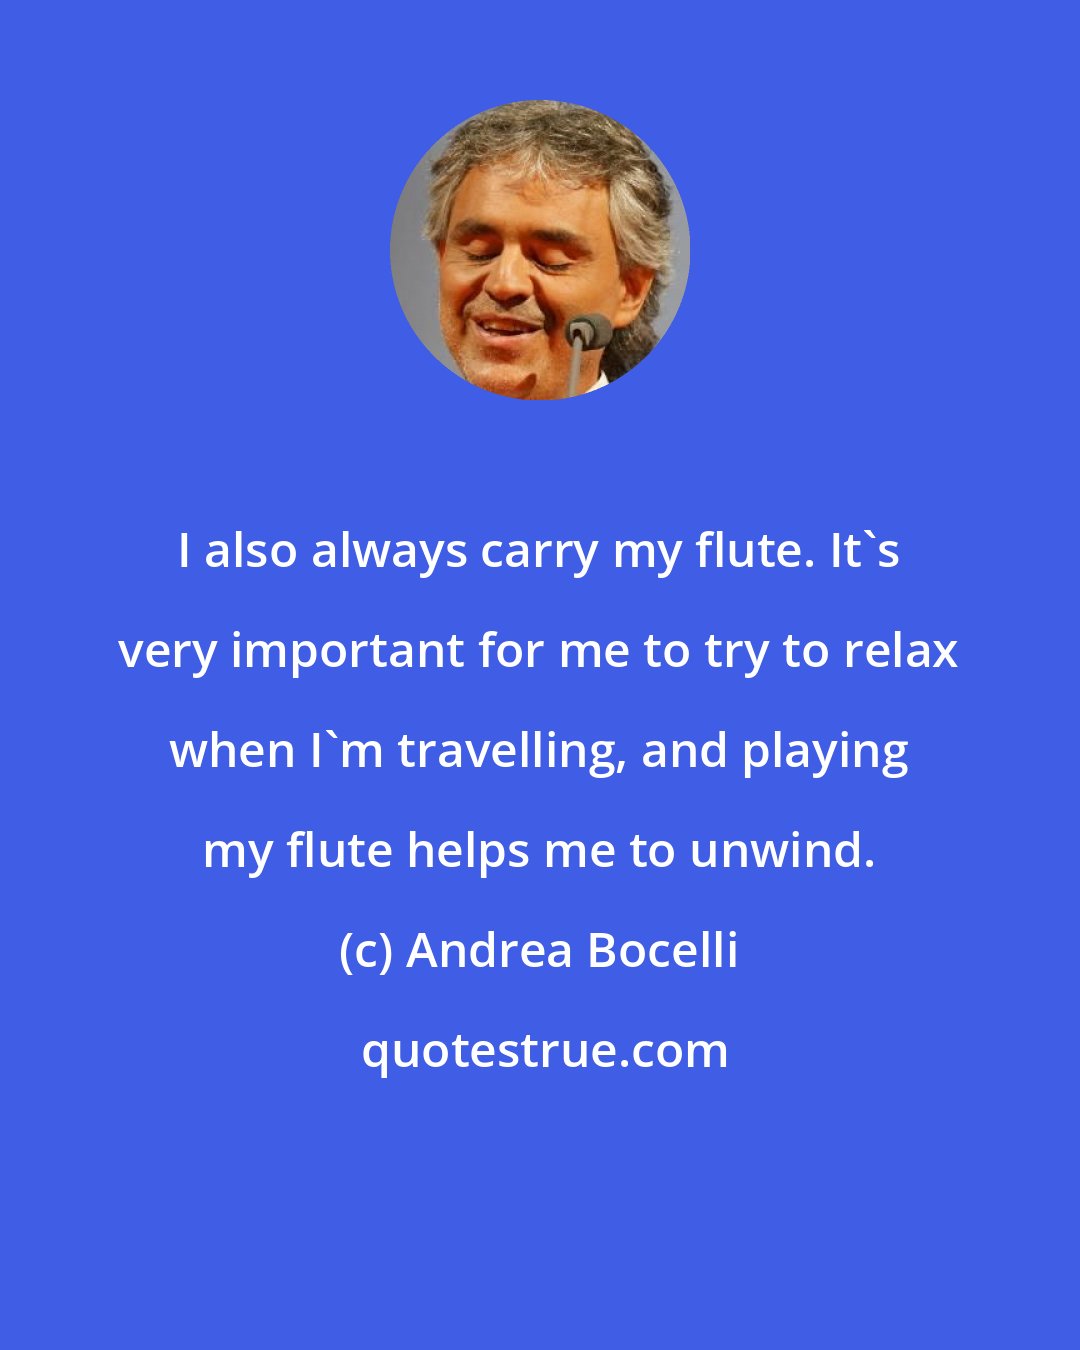 Andrea Bocelli: I also always carry my flute. It's very important for me to try to relax when I'm travelling, and playing my flute helps me to unwind.